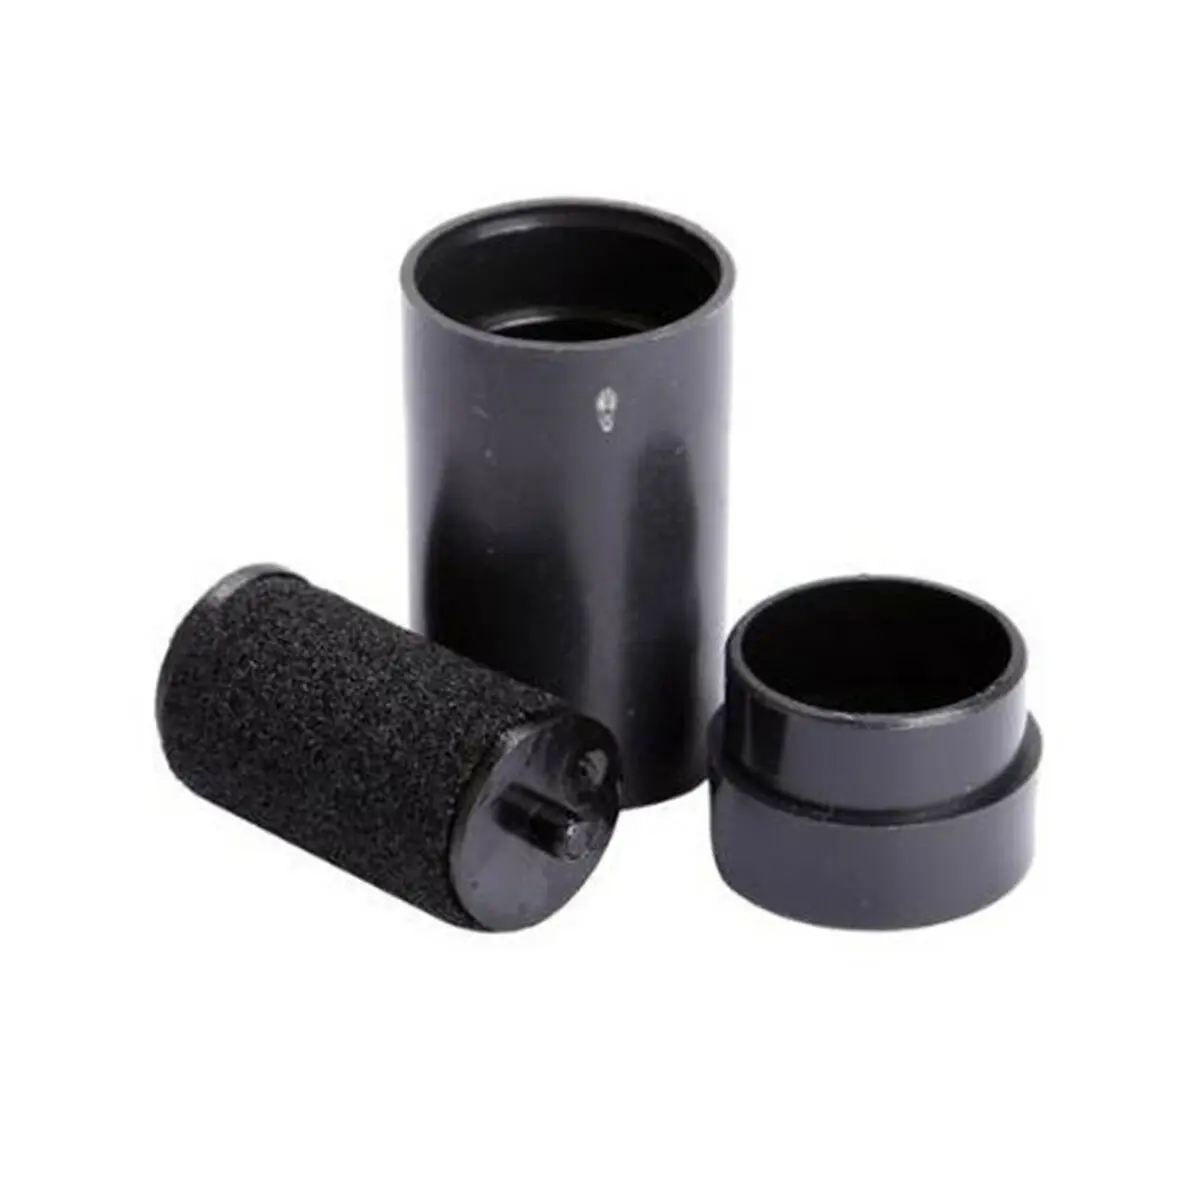 2PCS Refill Ink Rolls Ink Labeller Cartridge For MX-6600 MX5500 Price Tag Gun BF 